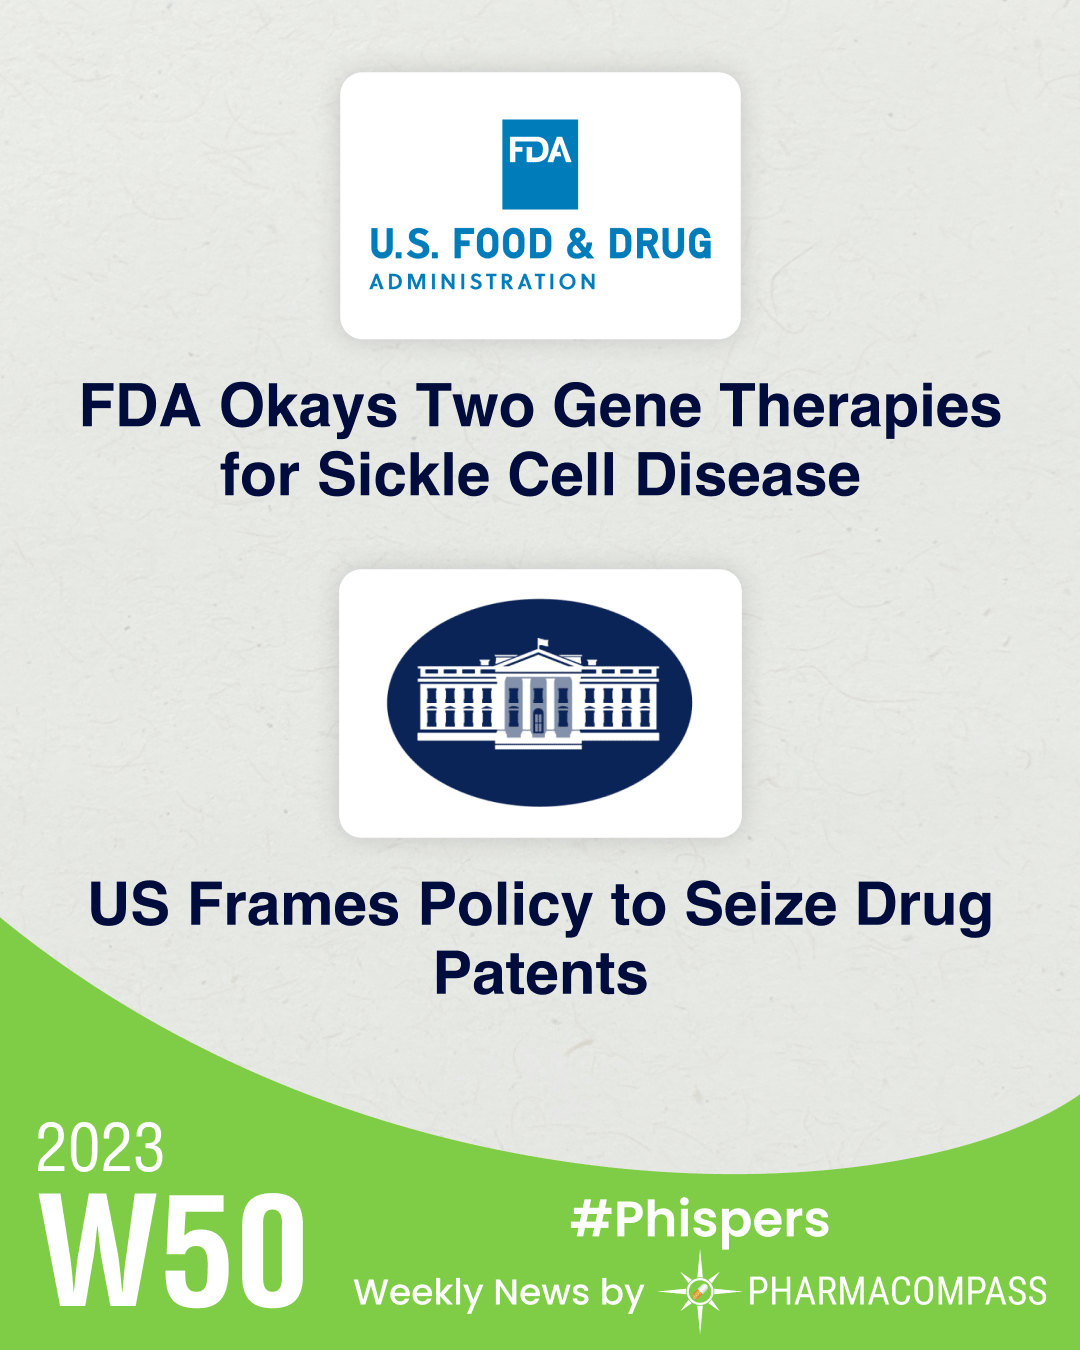 FDA okays two gene therapies for sickle cell disease; US frames policy to seize drug patents